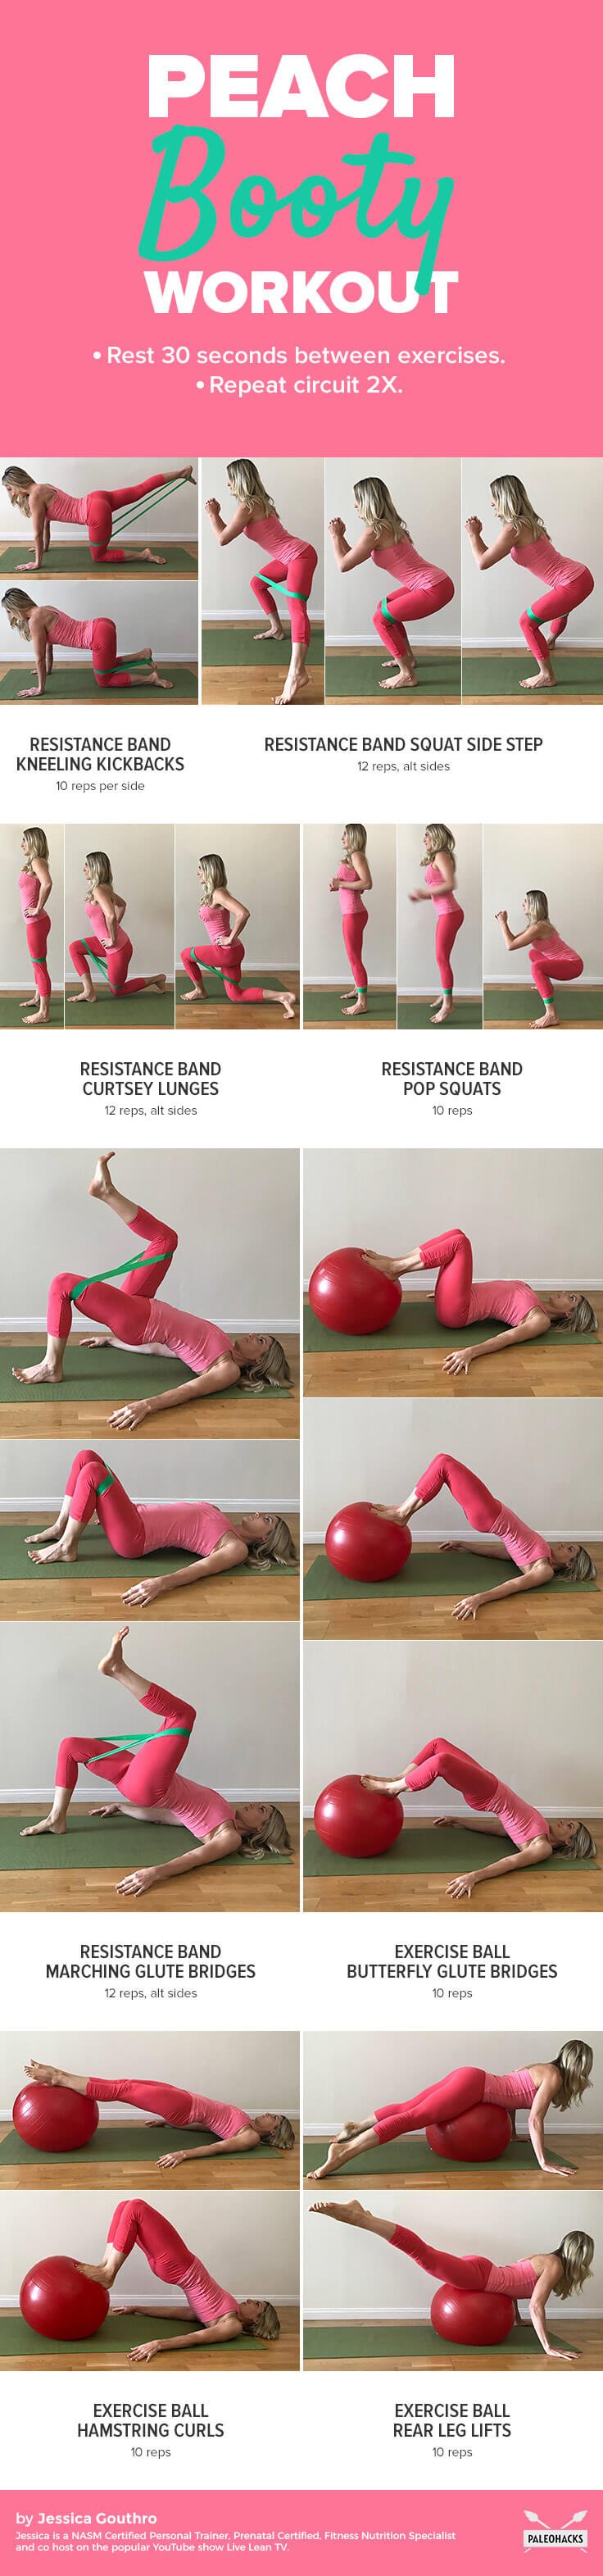 peach booty workout infographic